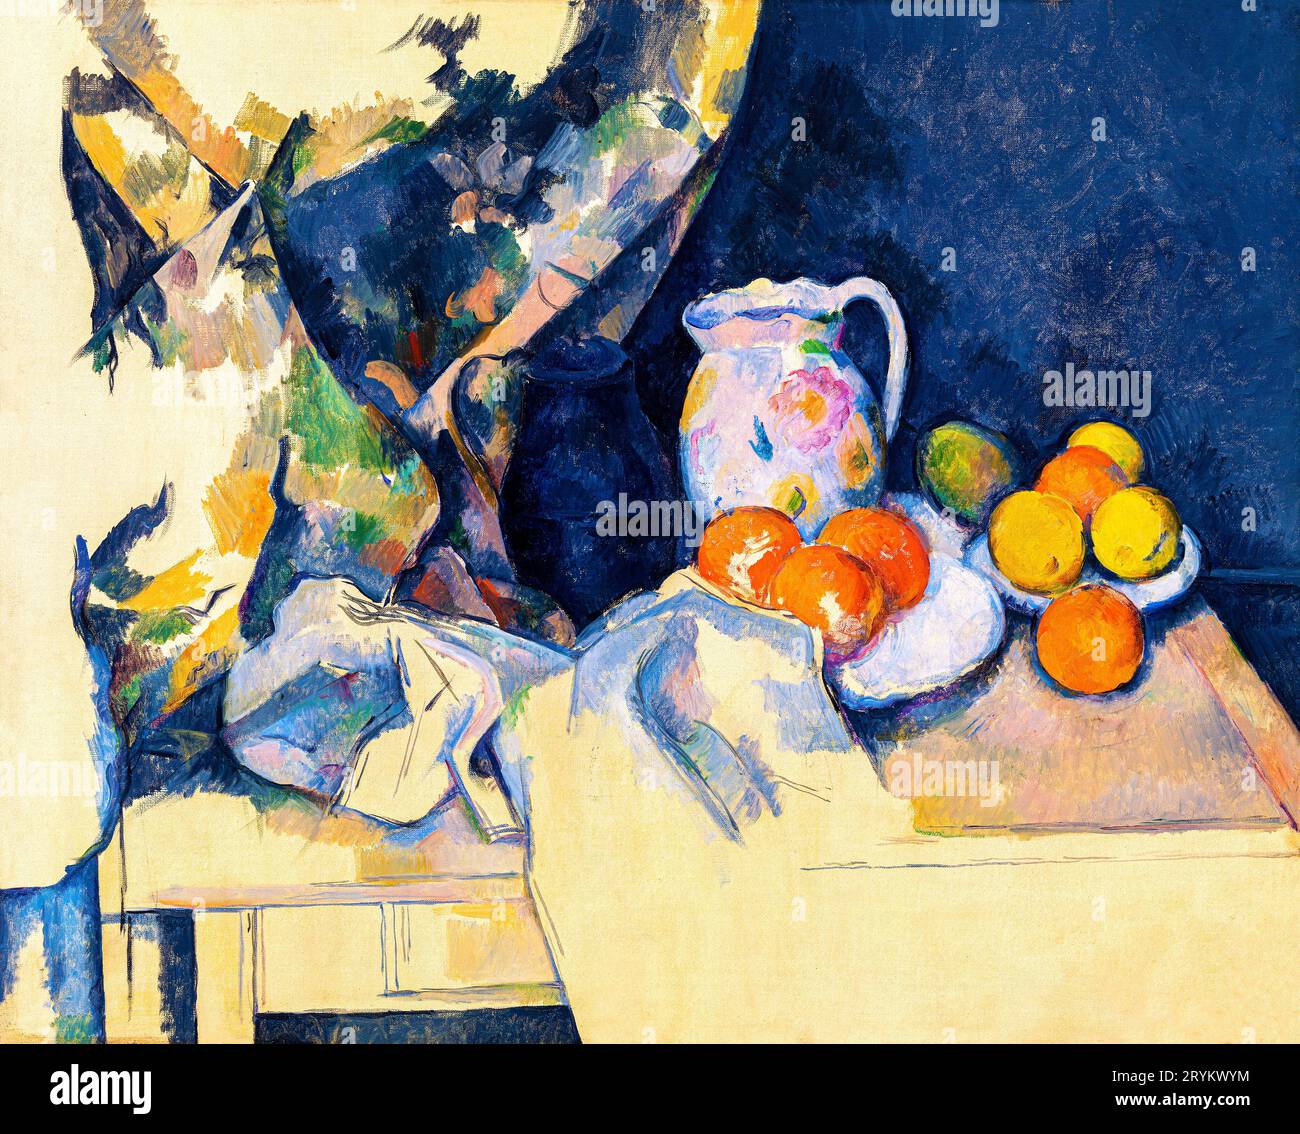 Paul Ceacute; zanne's Curtain and Fruit still life painting. Stock Photo